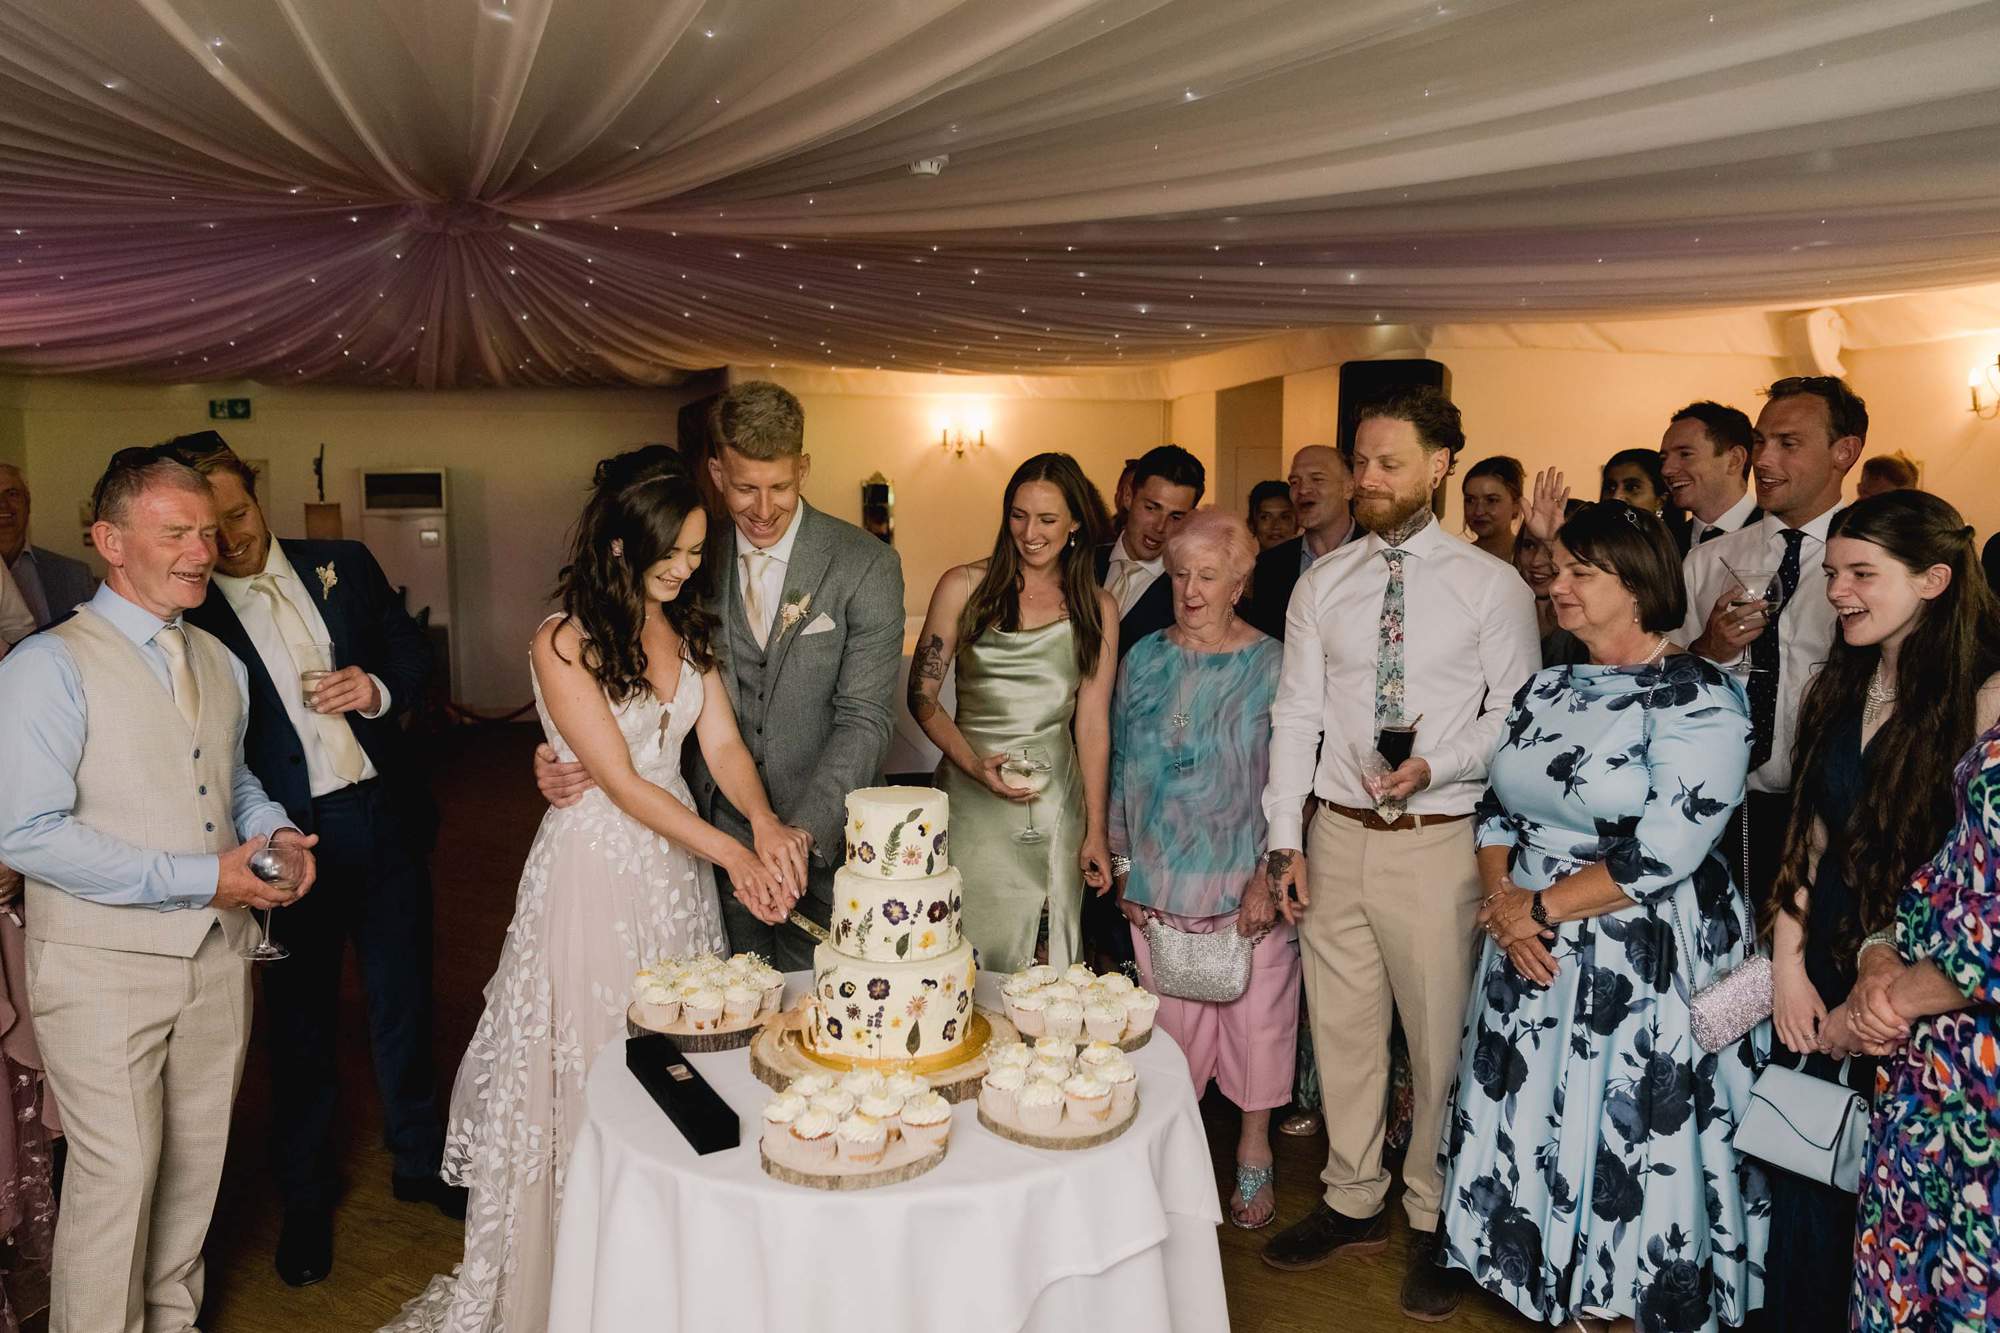 Bride and groom cut the cake together on their wedding day at Southdowns Manor in the National Park.